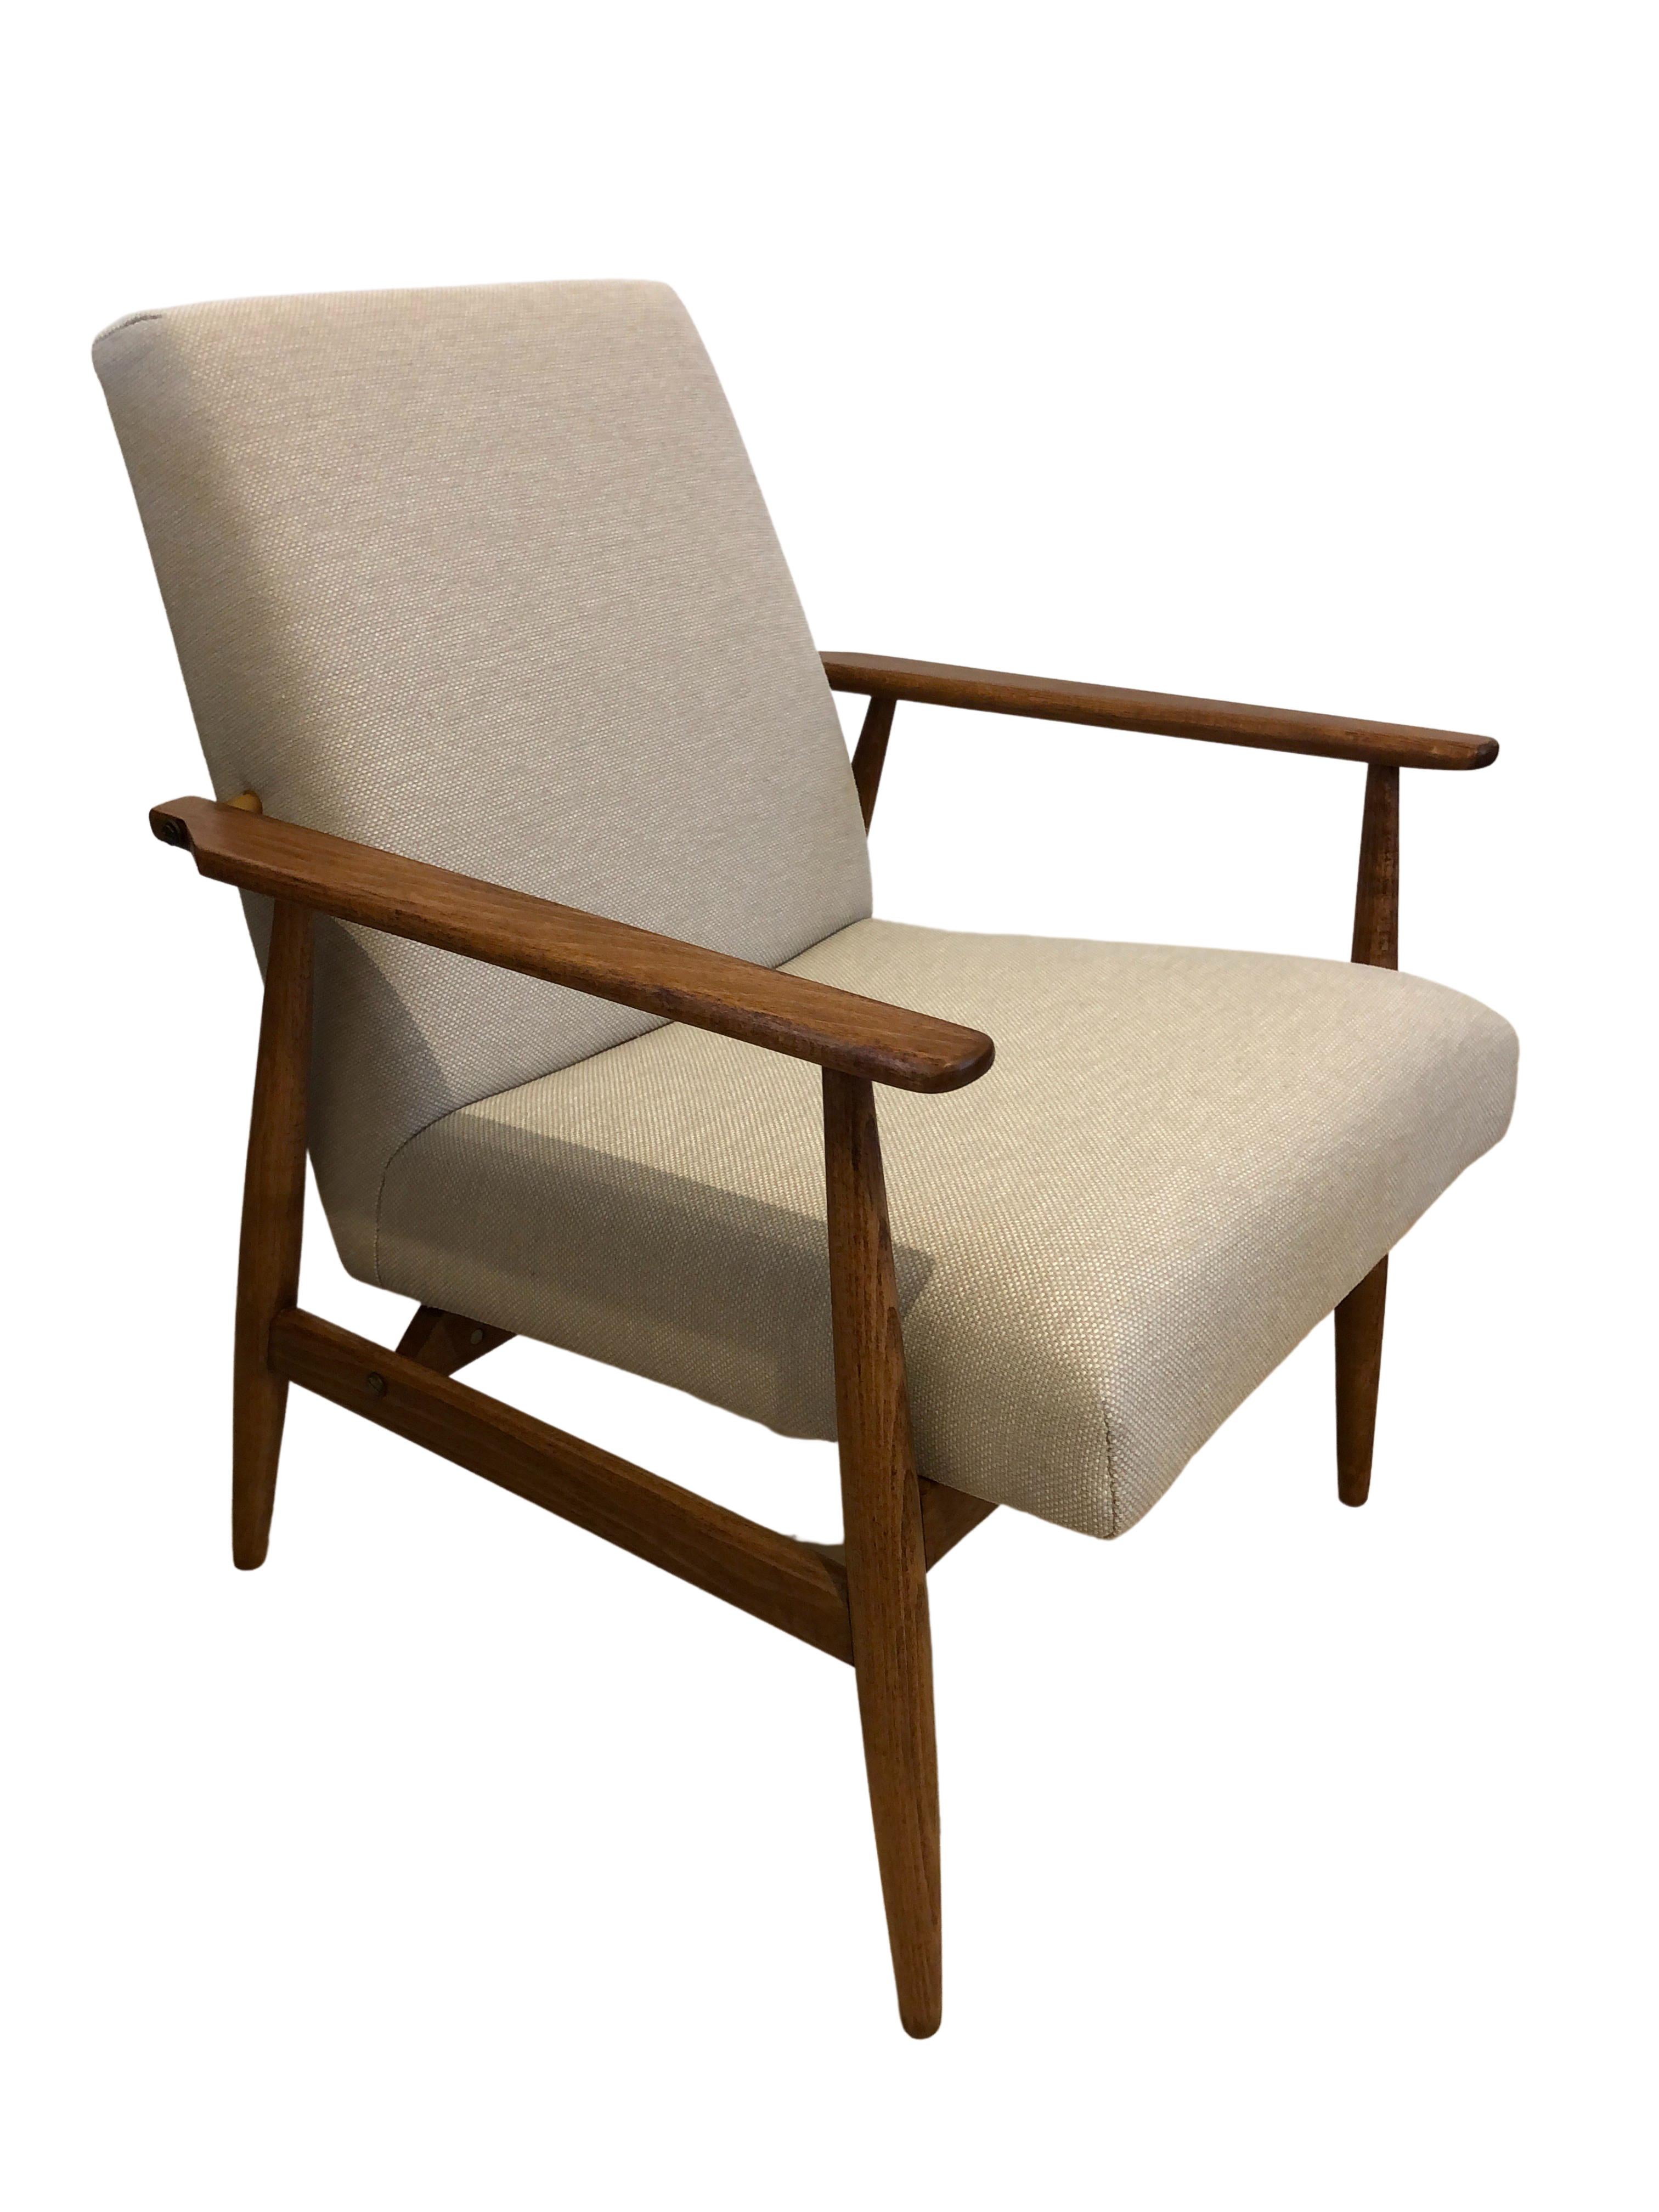 Midcentury Armchair by Henryk Lis in Beige Cotton Linen Upholstery, 1960s For Sale 2